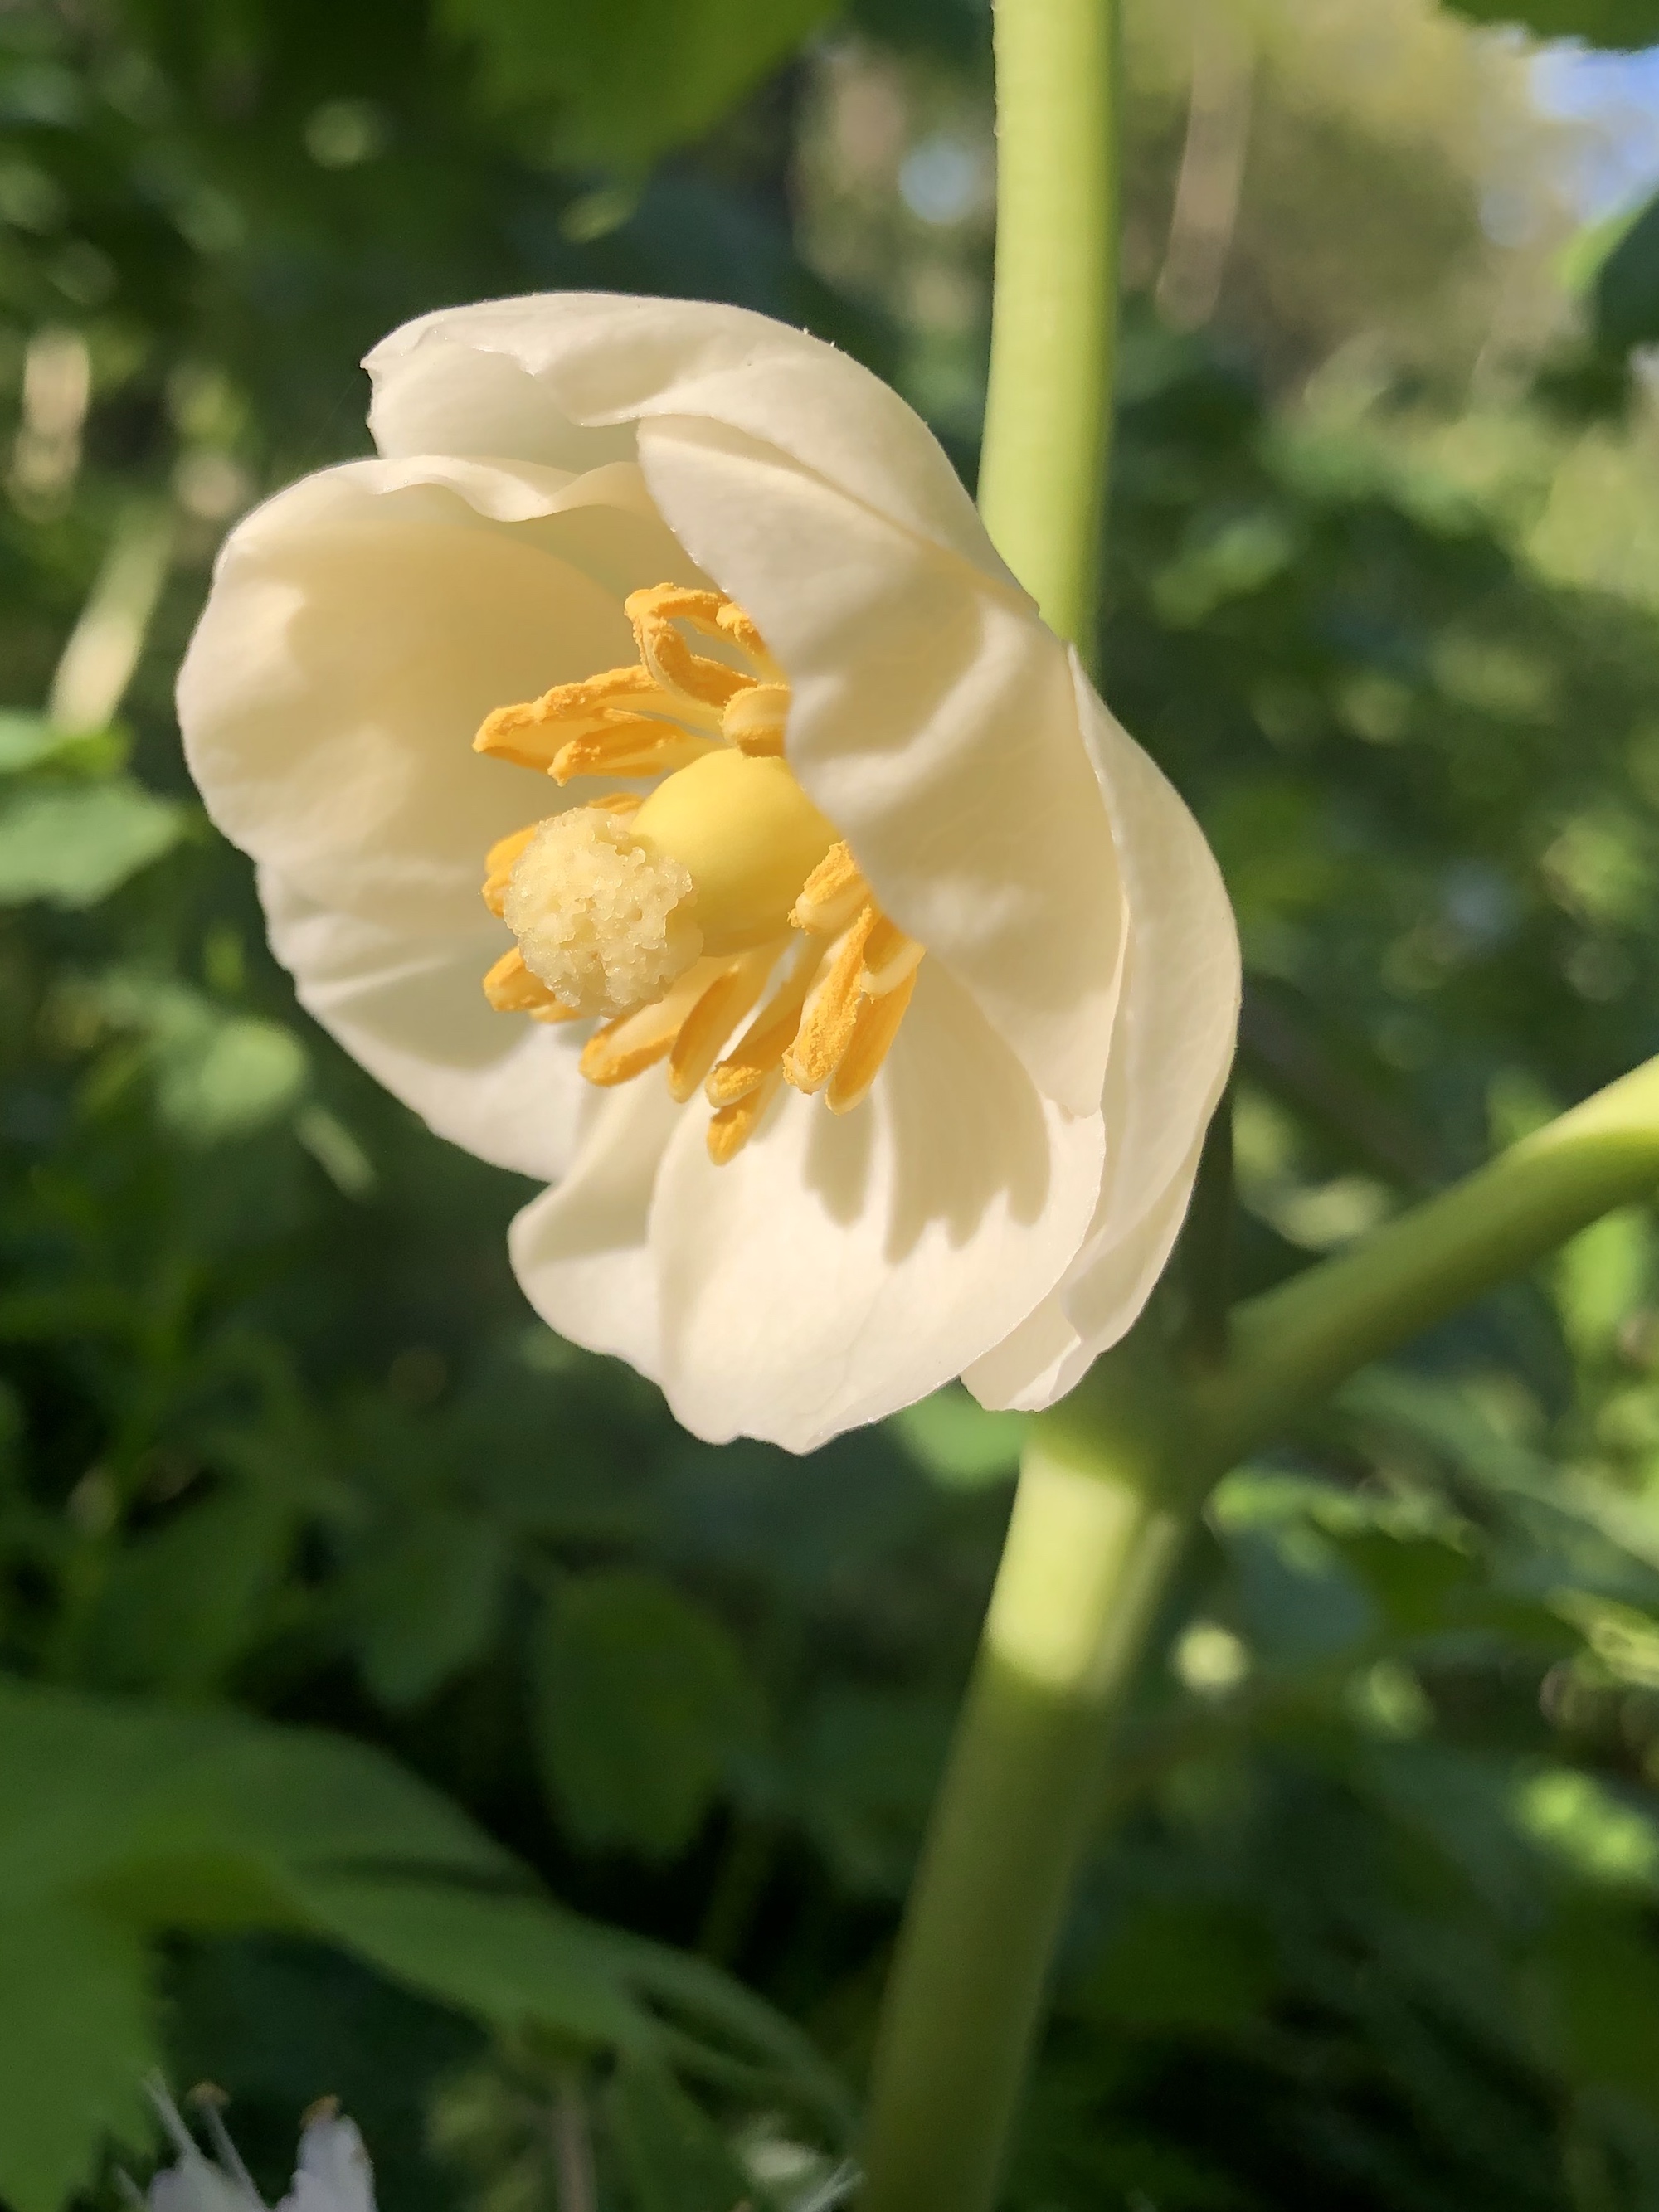 Mayapple blooms by Council Ring in Madison, Wisconsin on May 13, 2021.